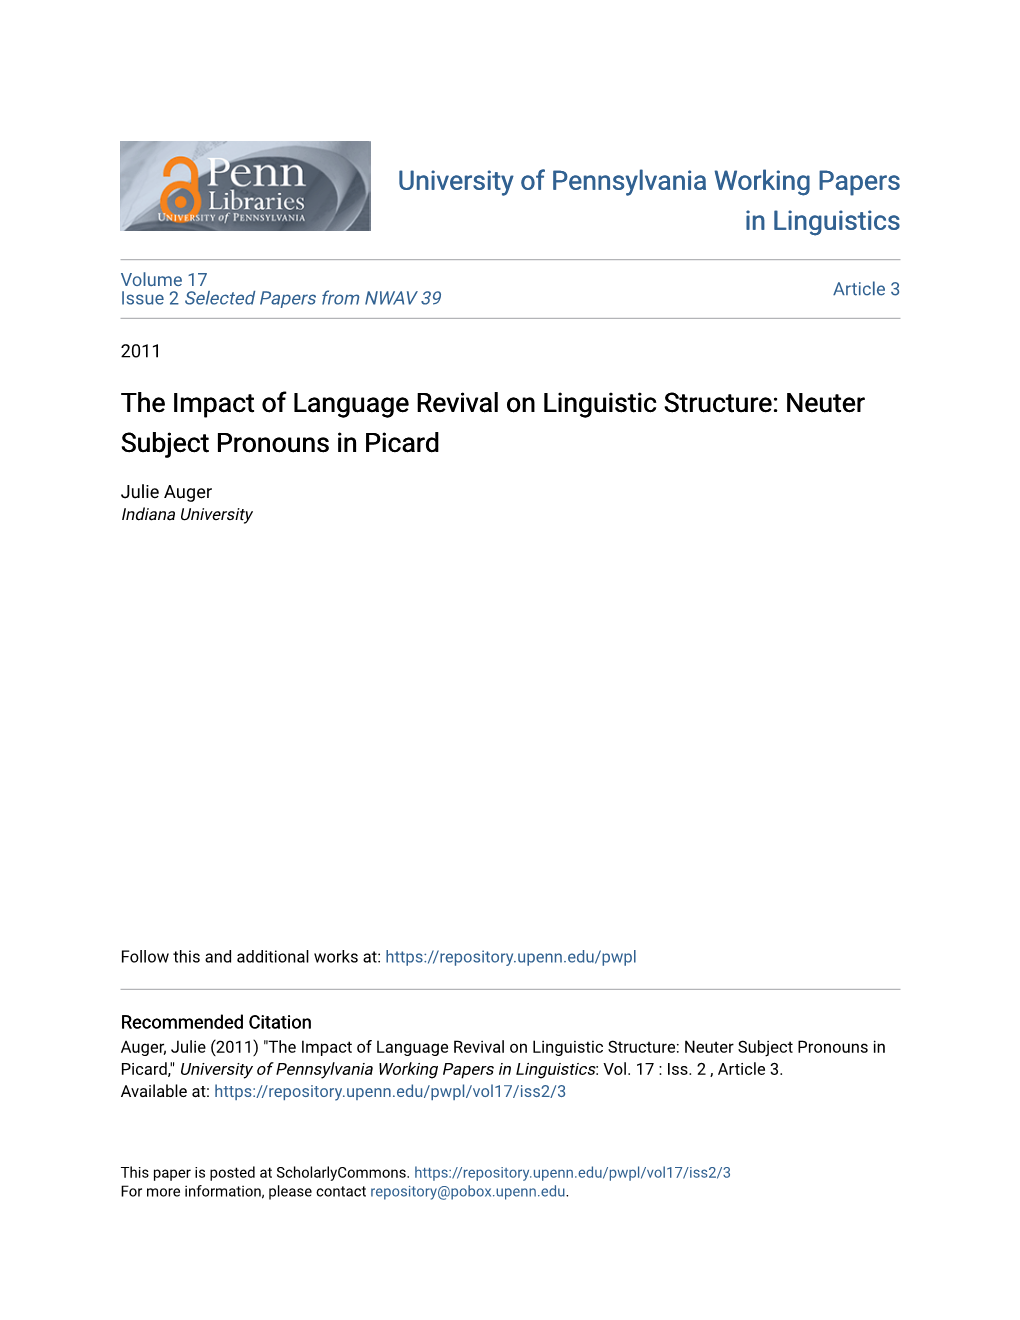 The Impact of Language Revival on Linguistic Structure: Neuter Subject Pronouns in Picard